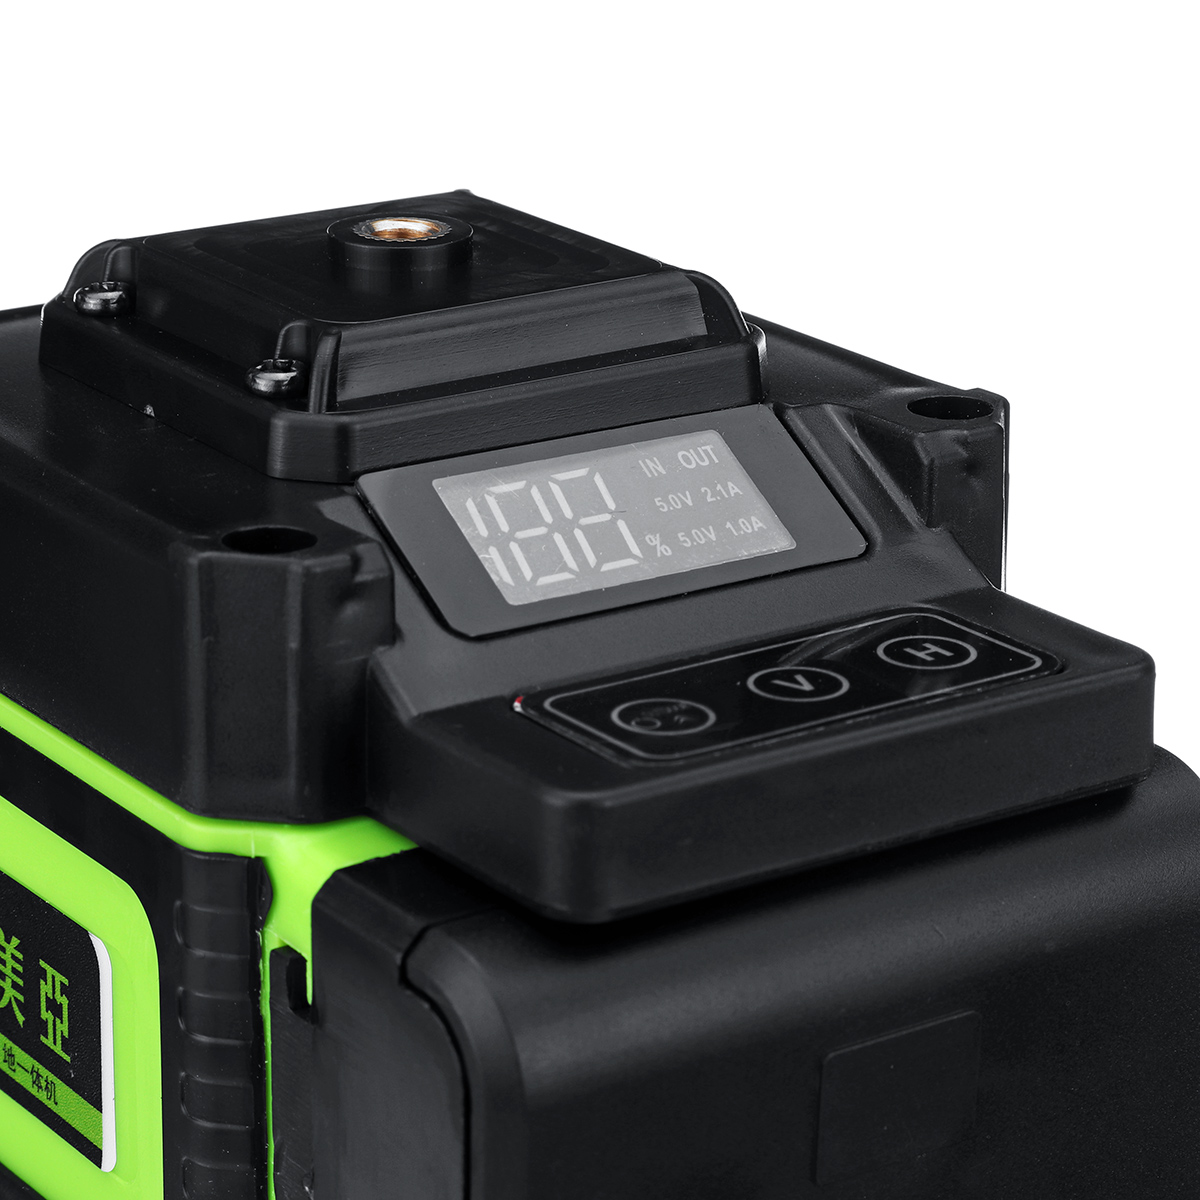 12 Lines Laser Level Measuring DevicesLine 360 Degree Rotary Horizontal And Vertical Cross Laser Level with Base 16